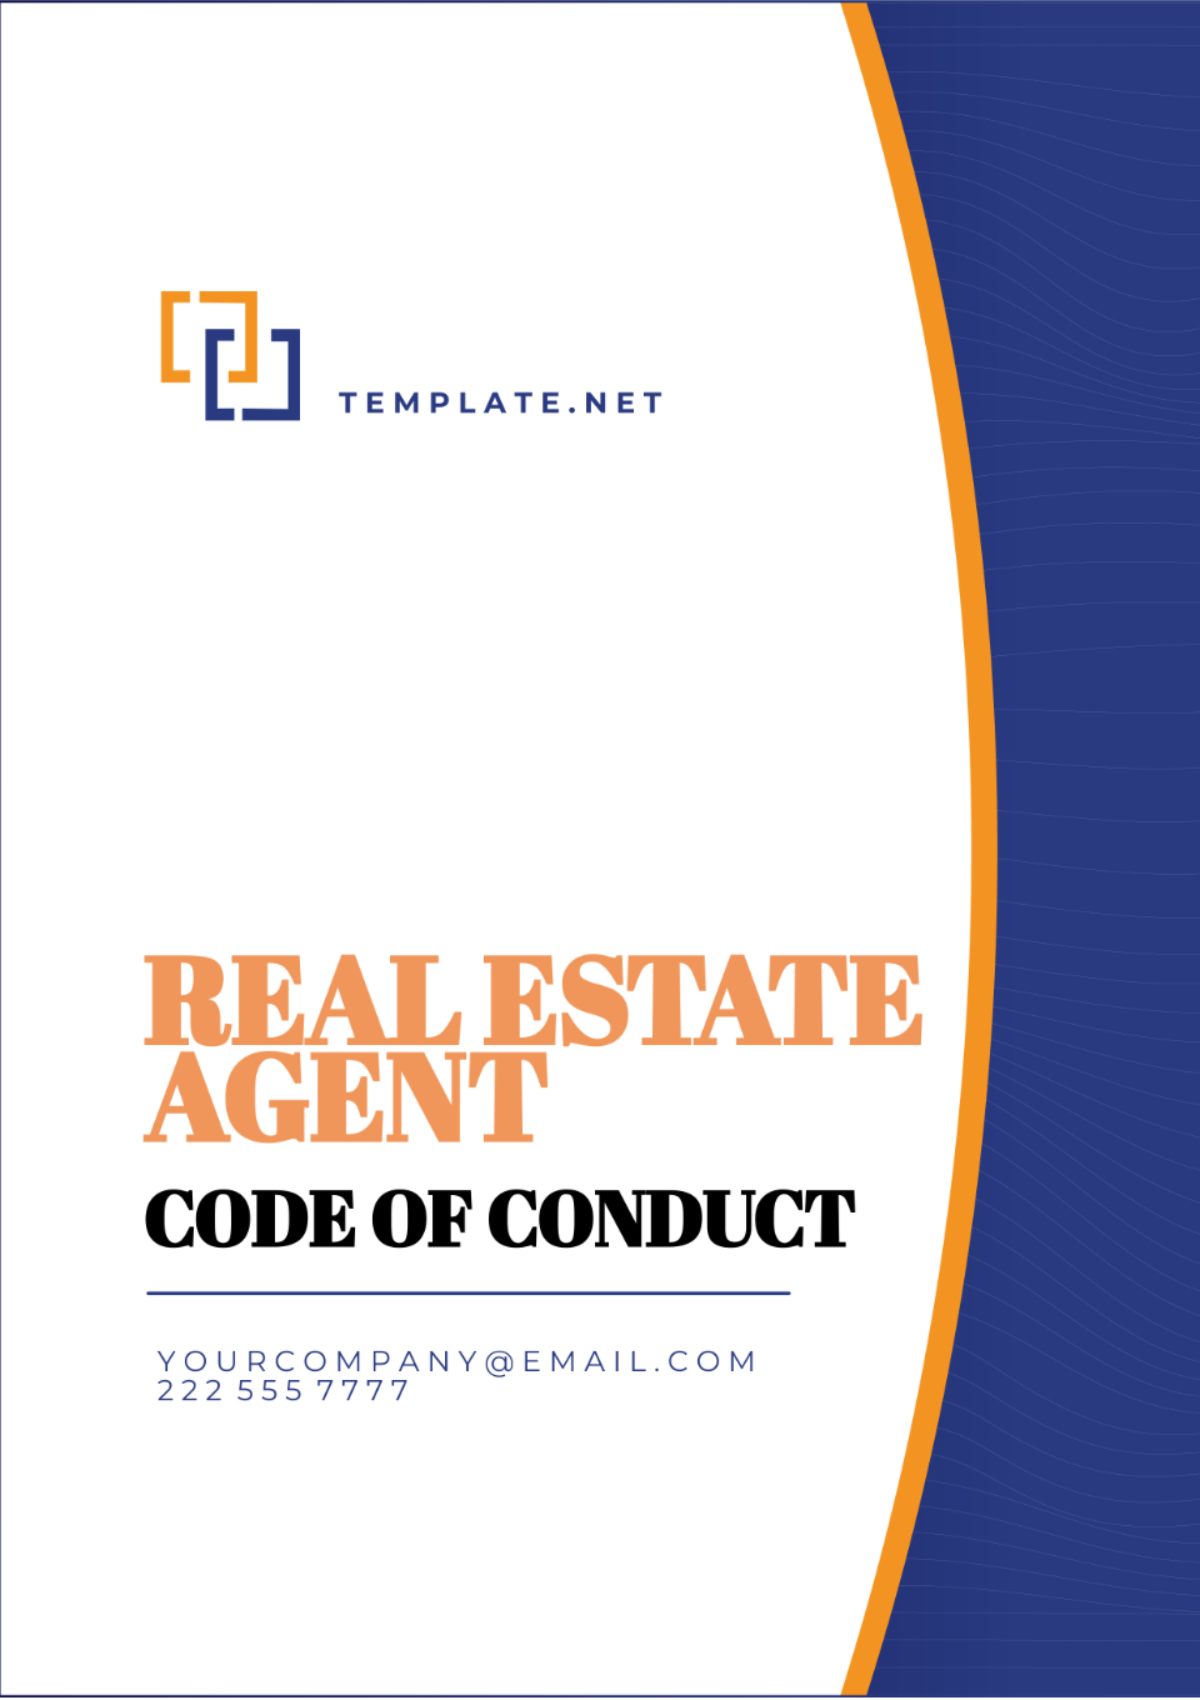 Real Estate Agent Code of Conduct Template